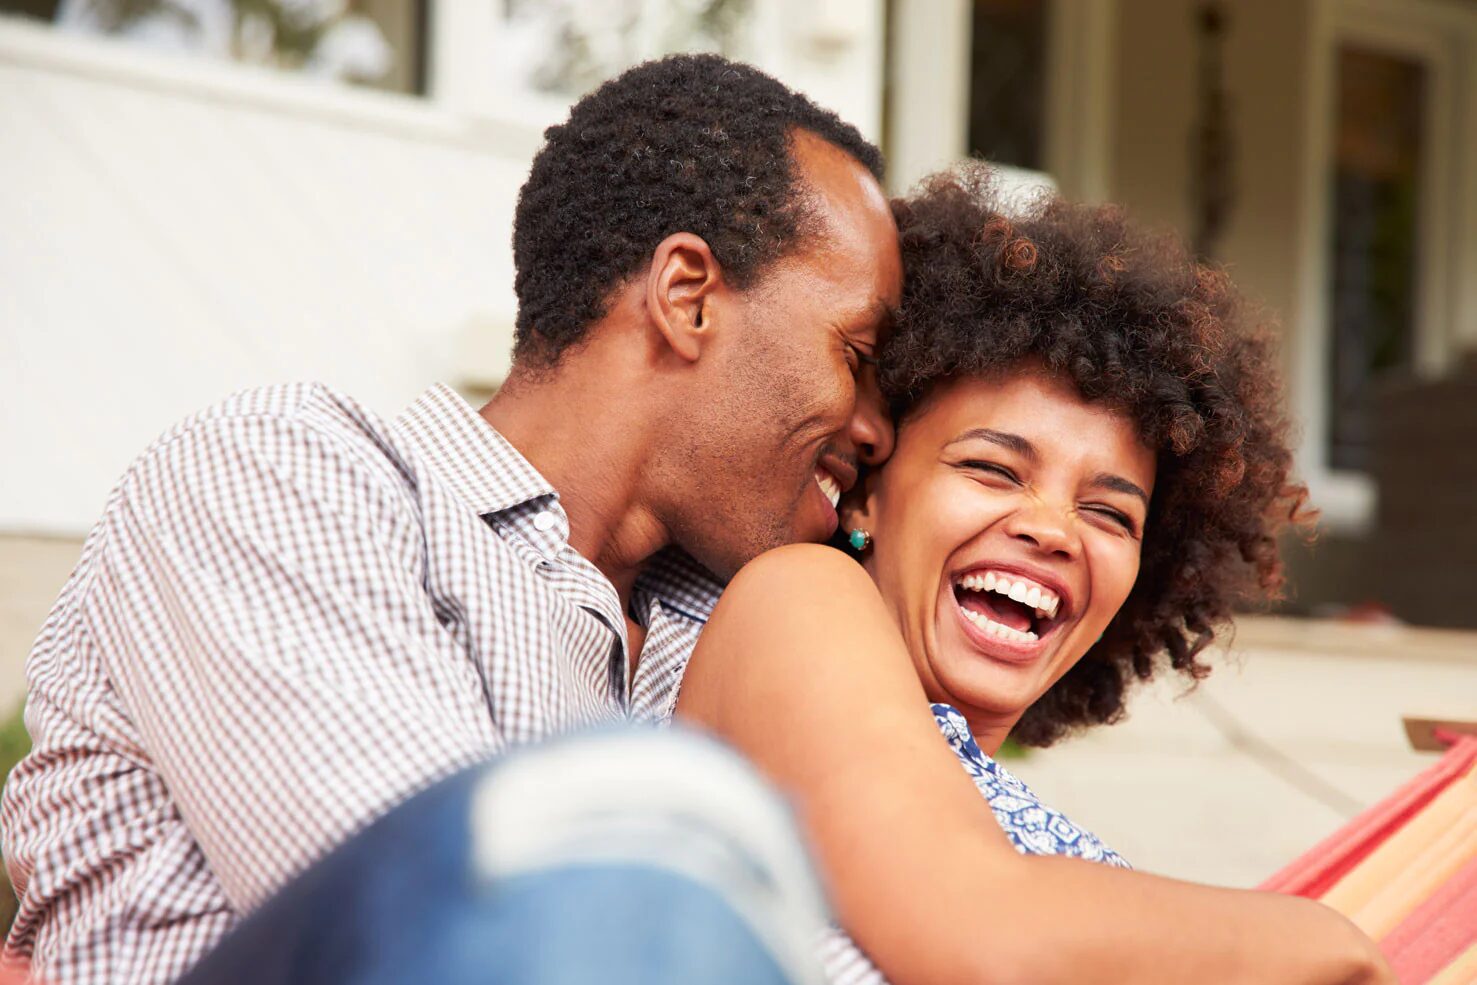 10 Signs To Look Out For in A Relationship: keeping your relationship strong